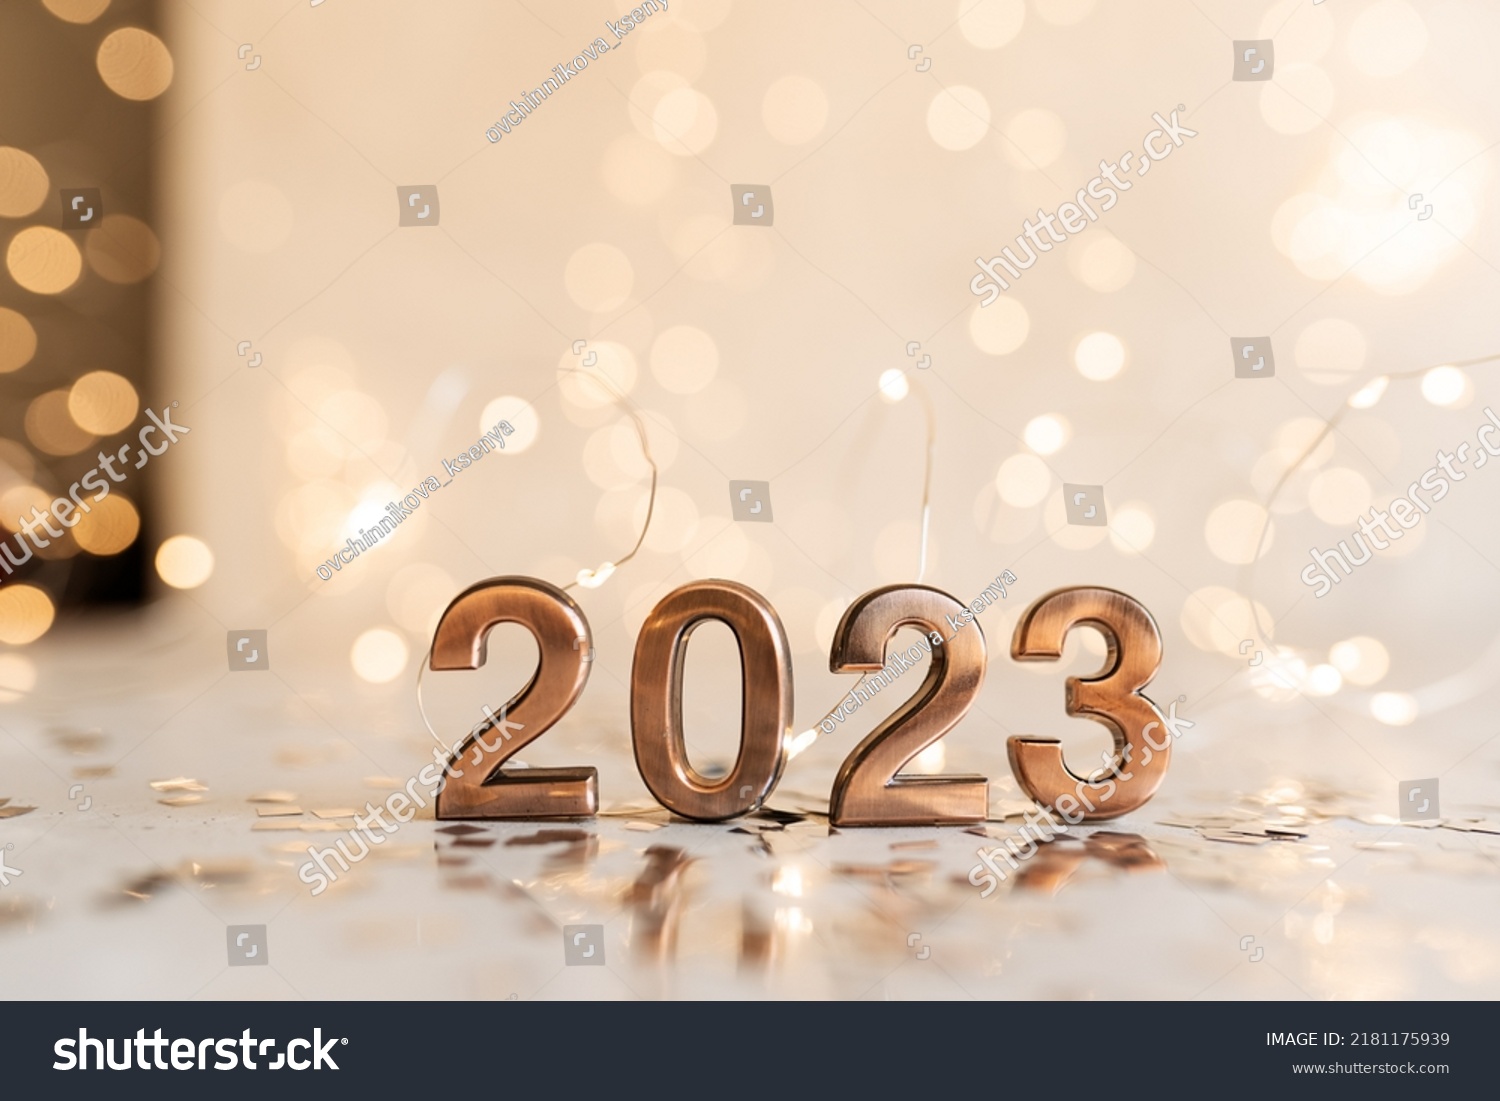 happy new year 2022 background new year holidays card with bright lights,gifts and bottle of hampagne #2181175939